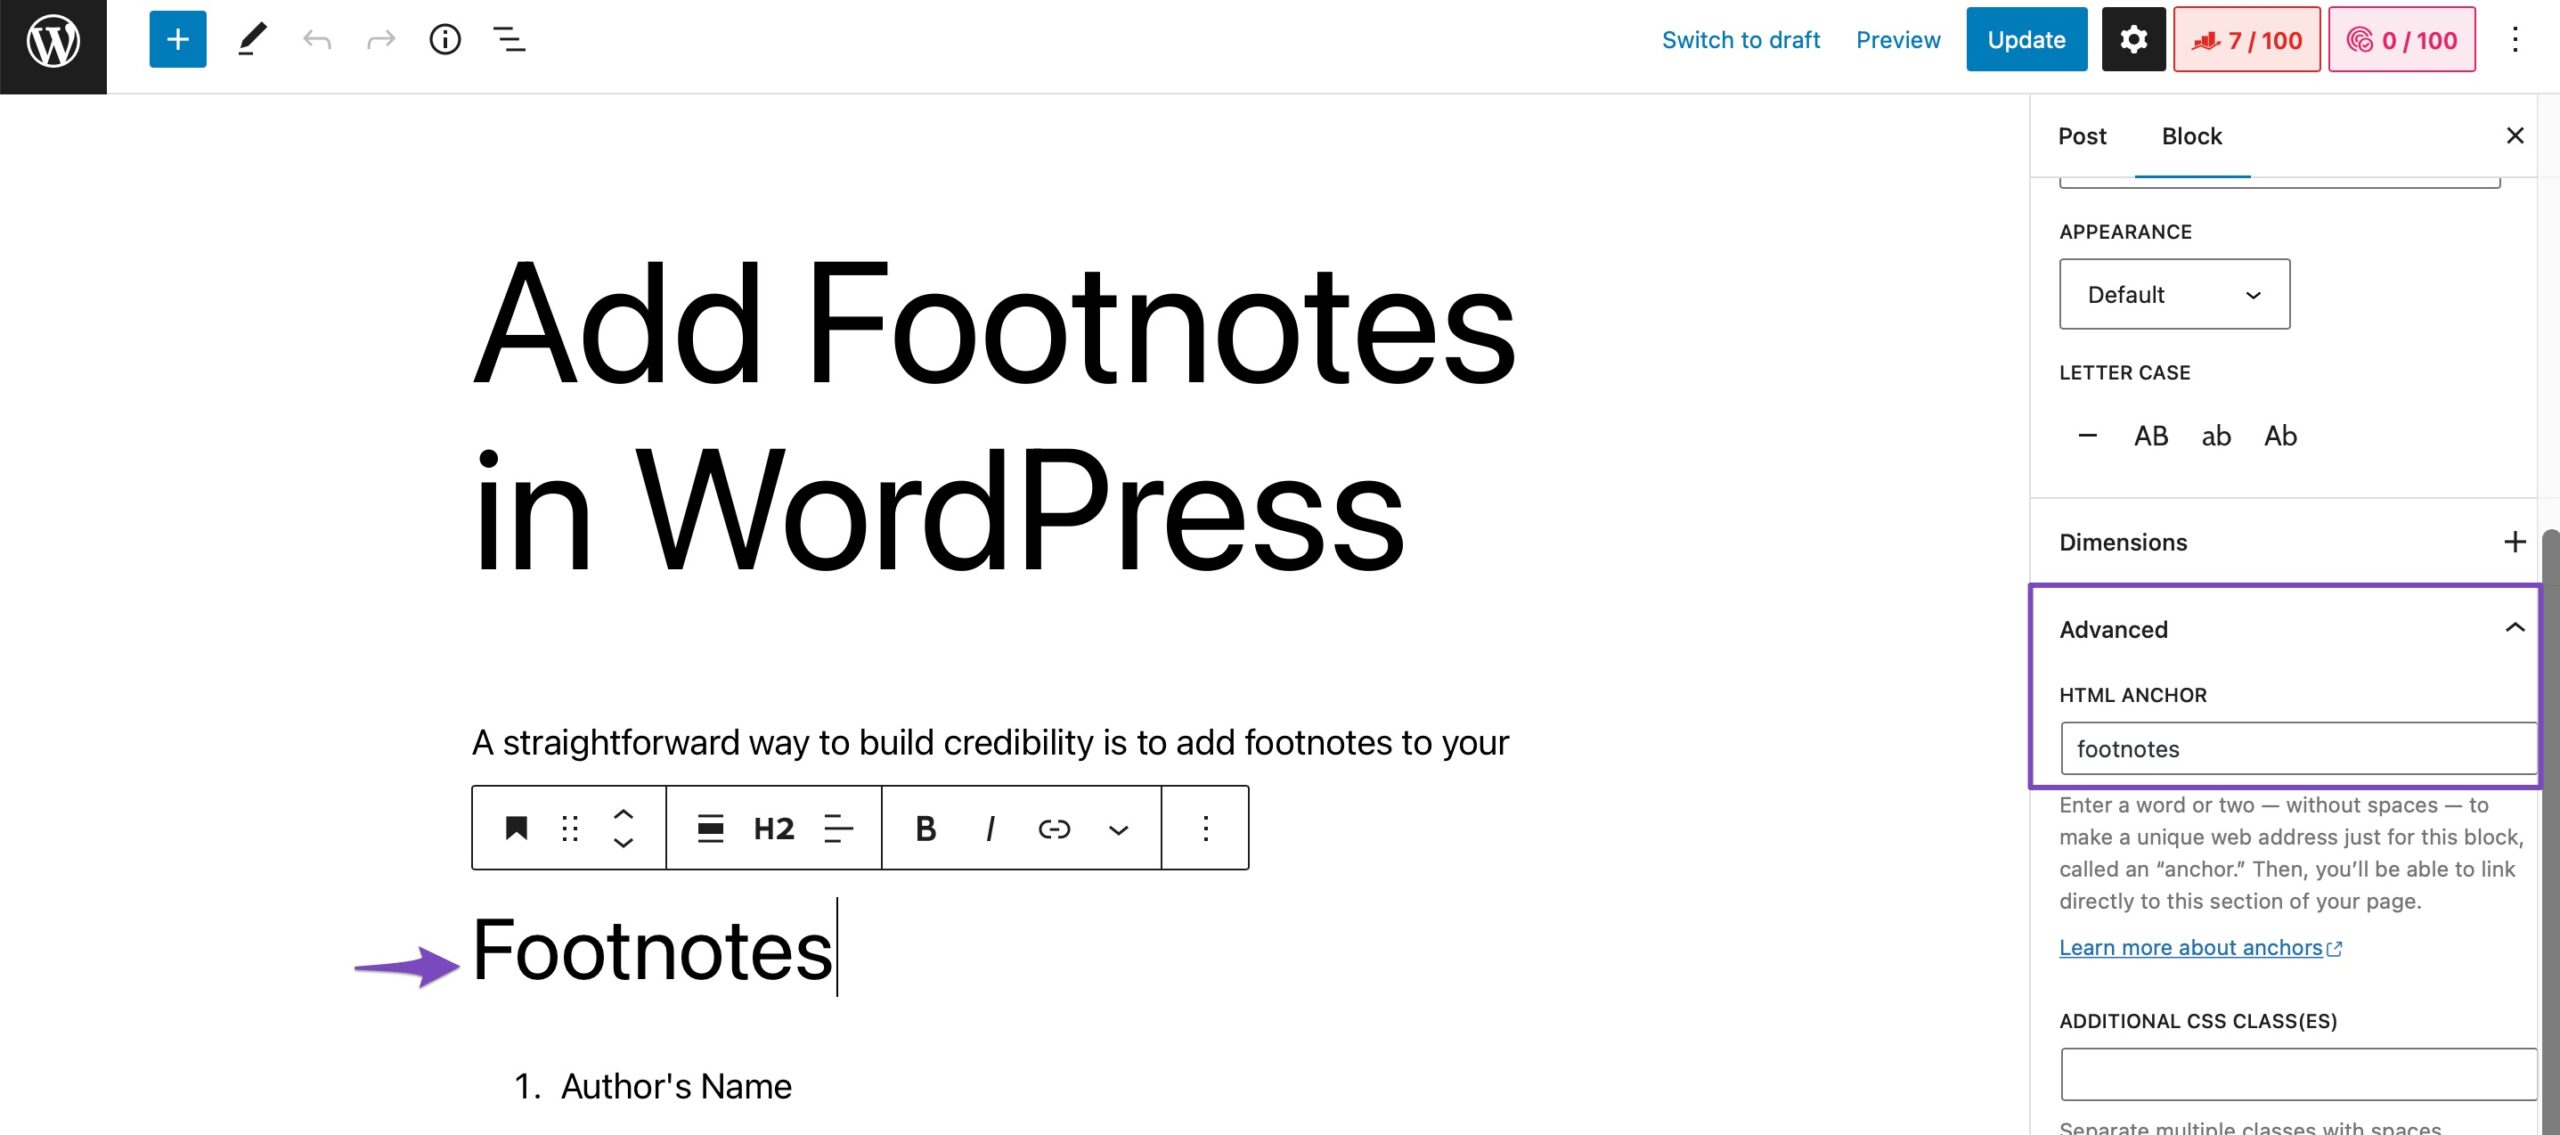 Create a Footnotes section and add an HTML anchor